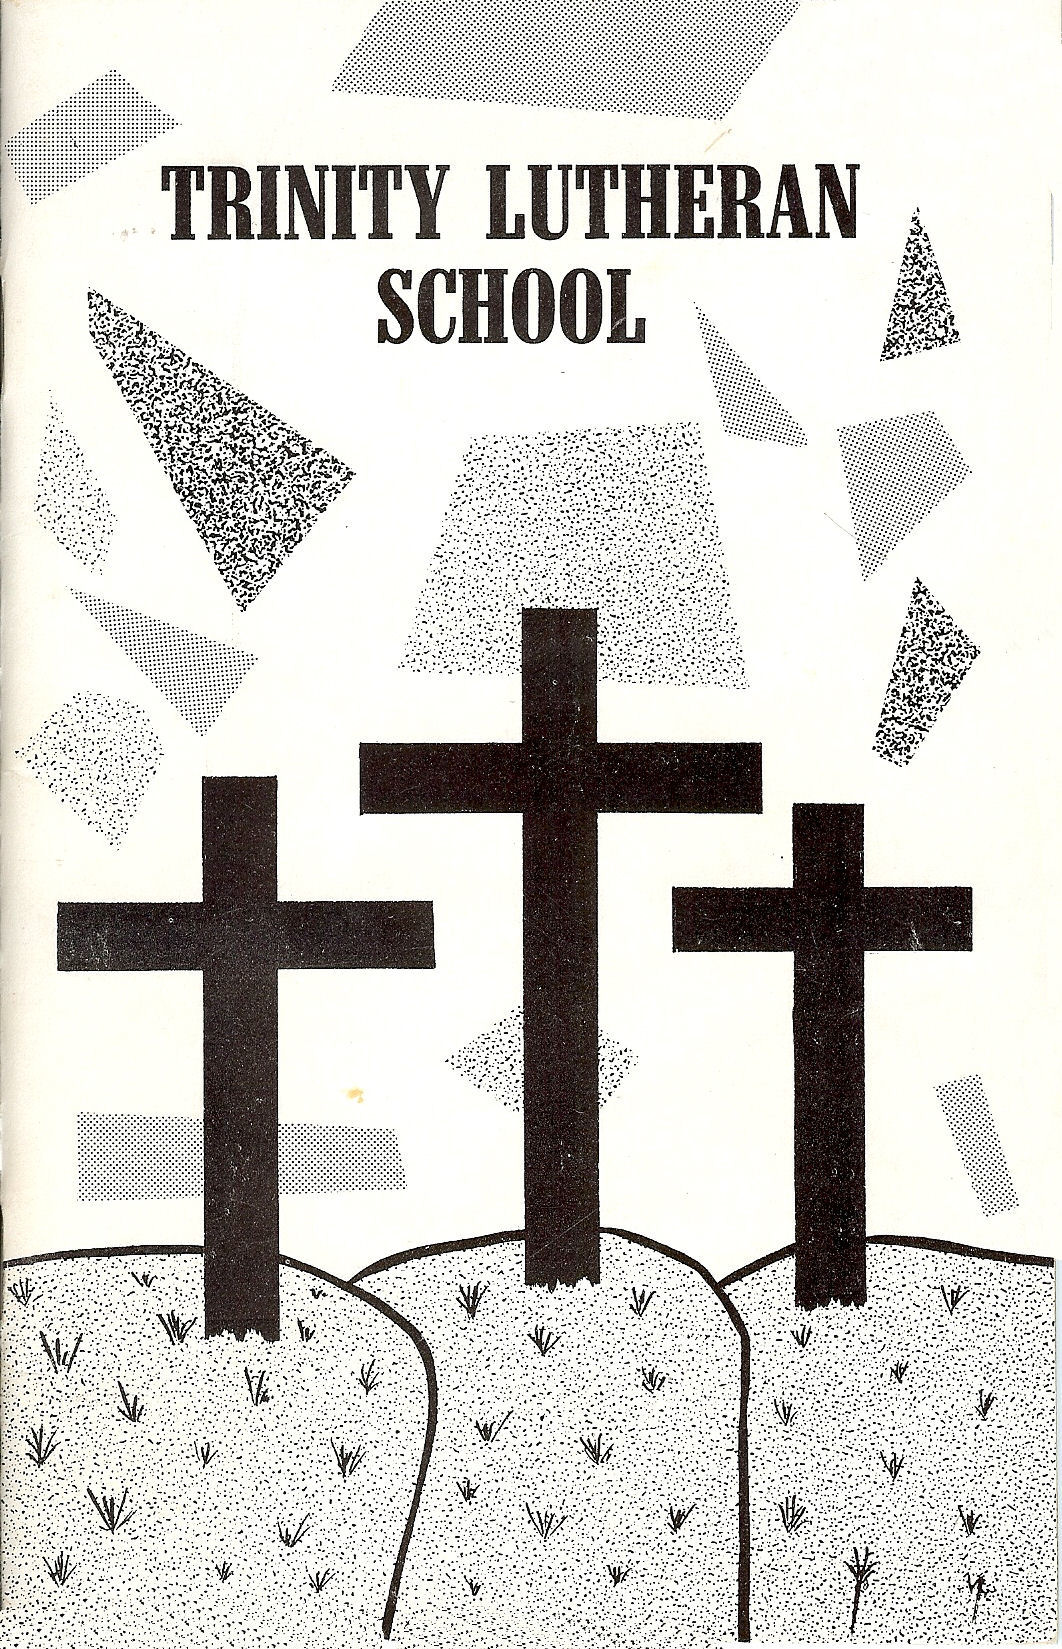 66-67 Yearbook Cover